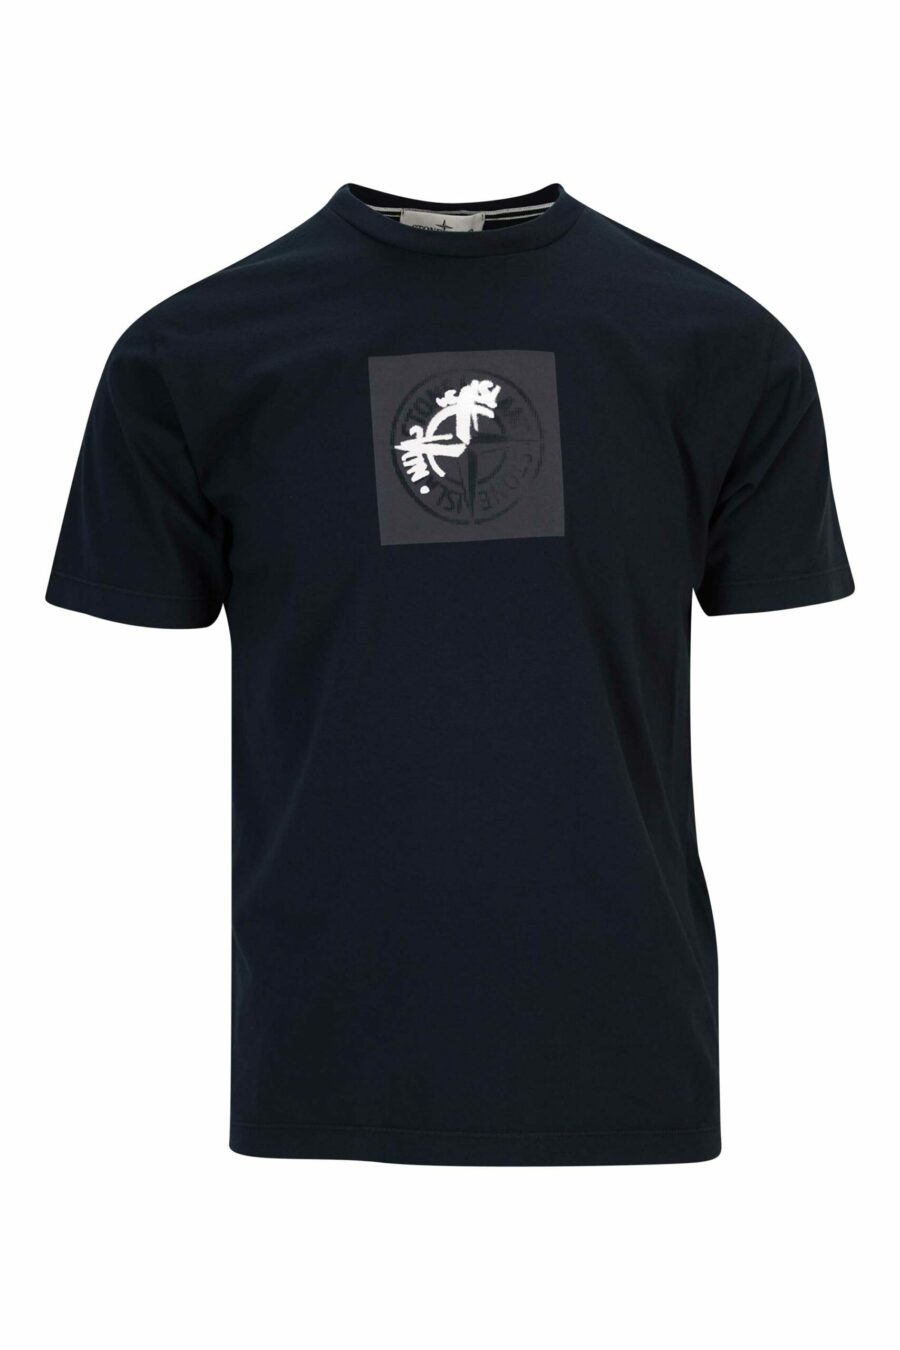 Dark blue T-shirt with compass logo print - 8052572911934 scaled